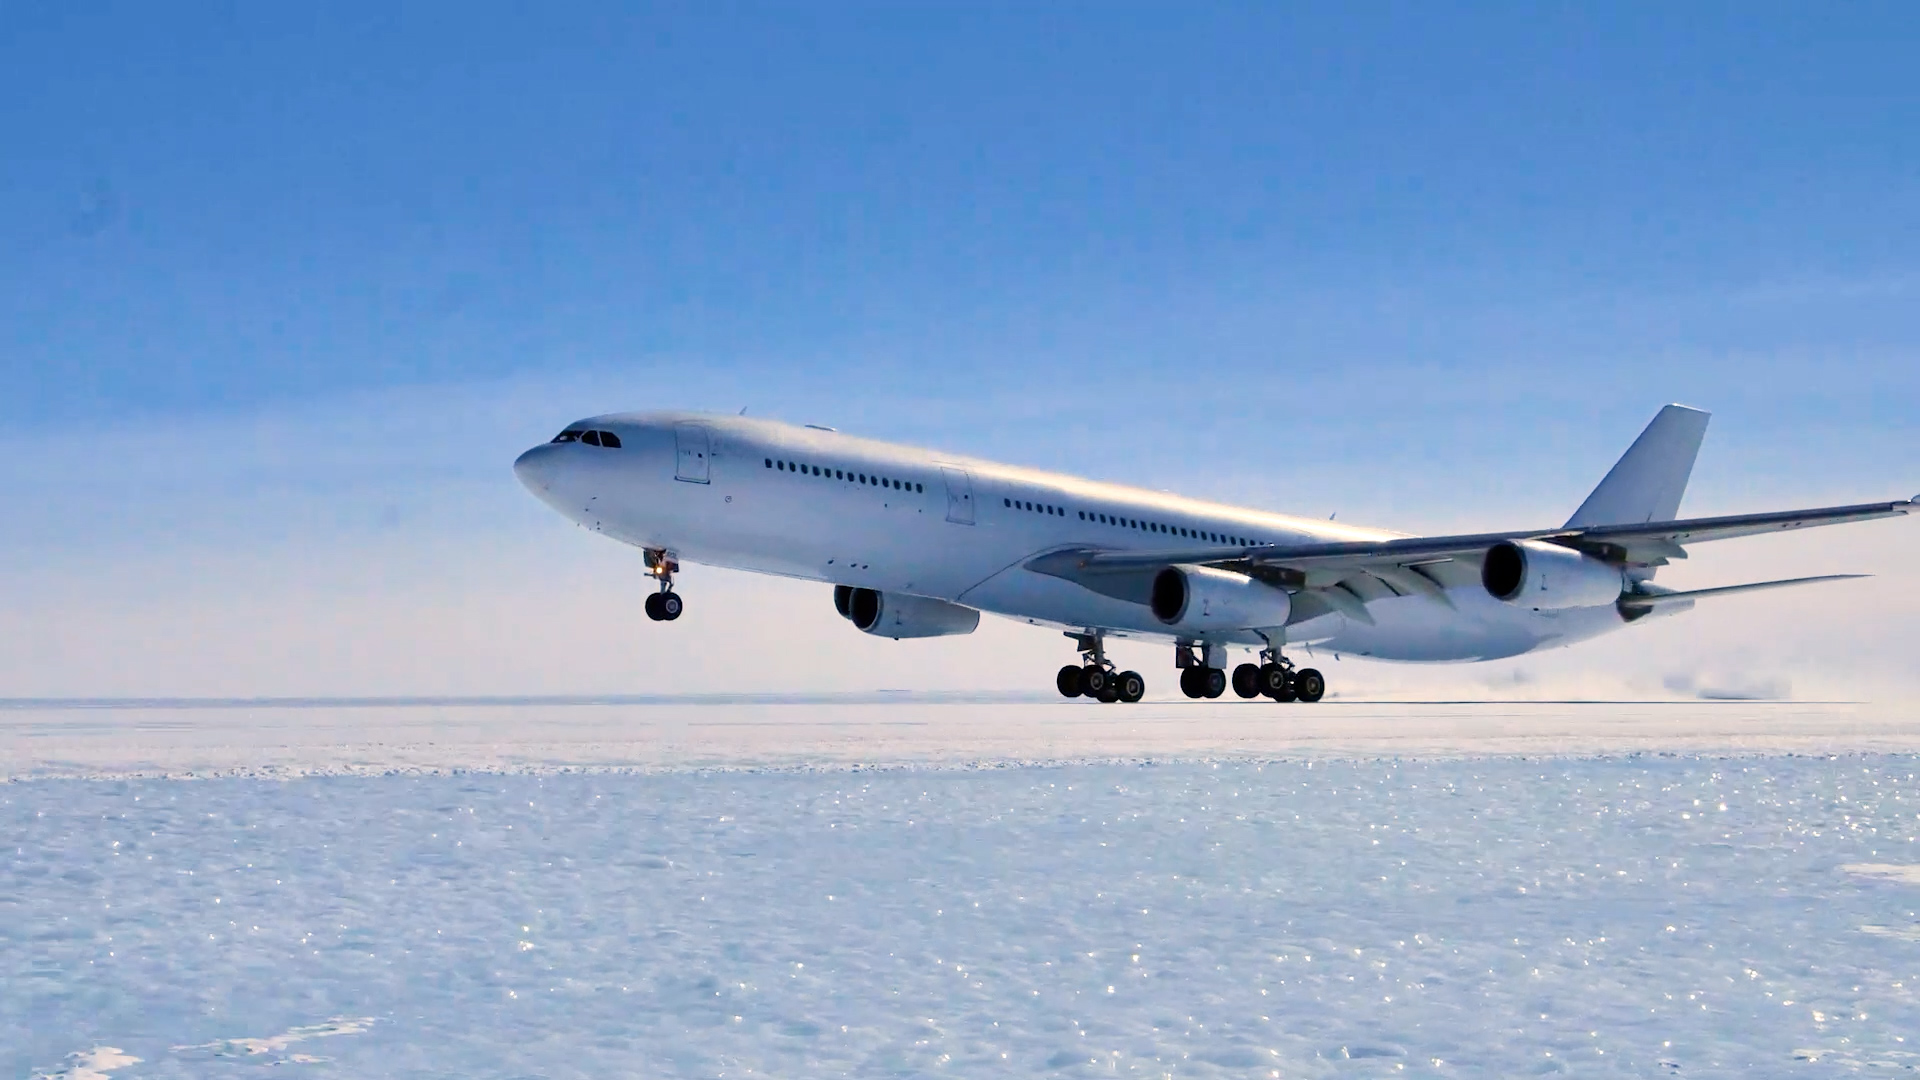 Watch Airbus A340 land in Antarctica for the first time - CNN Video